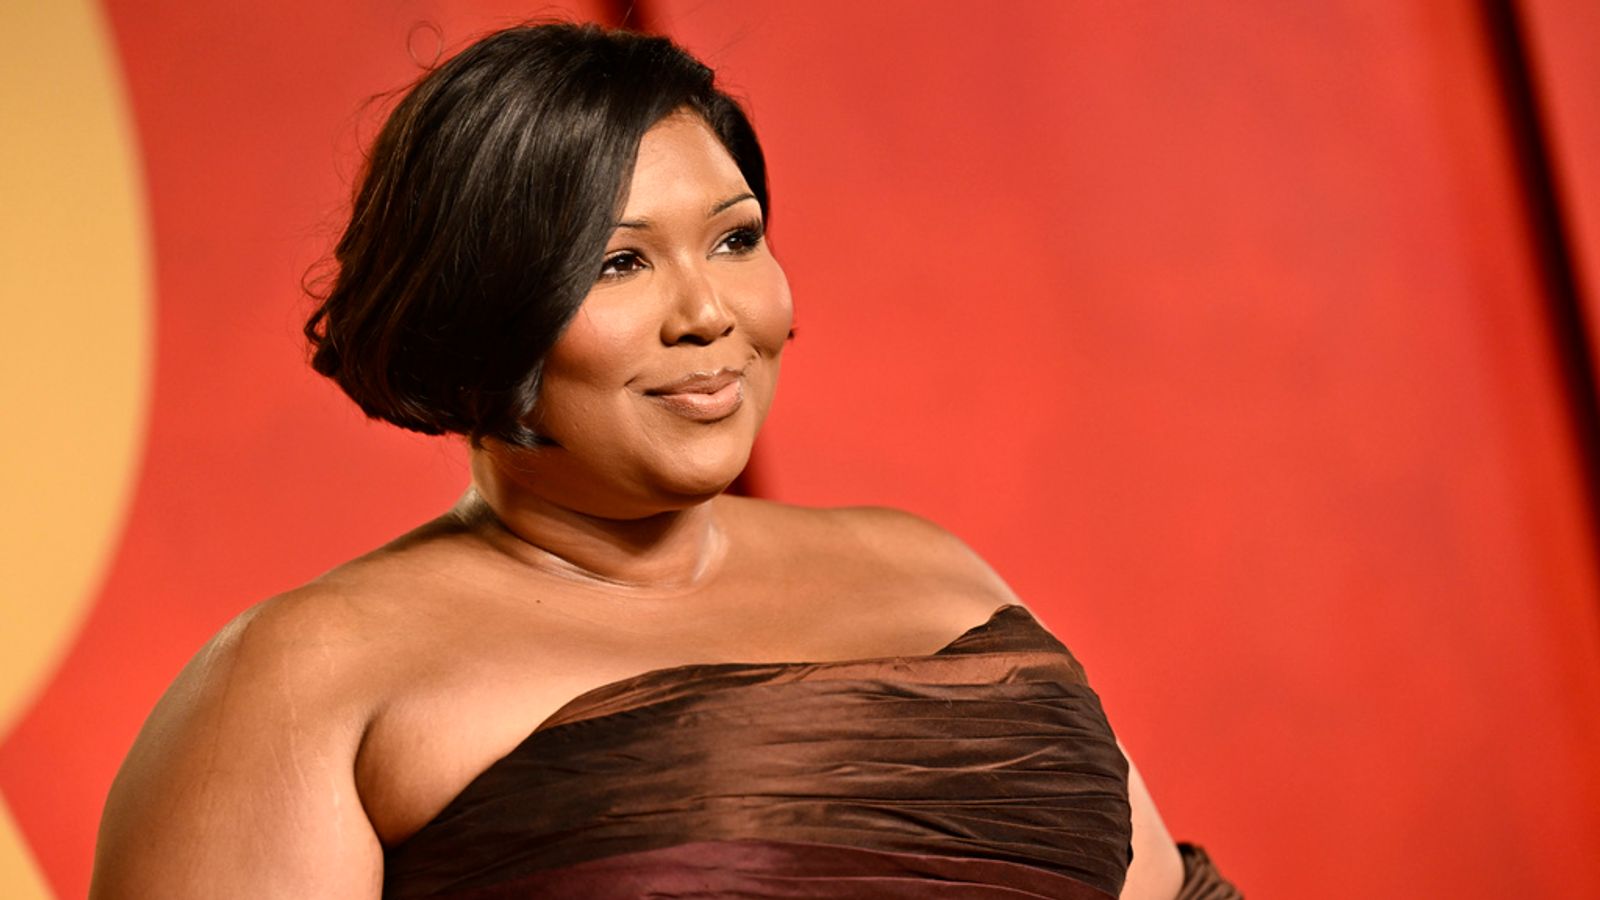 Lizzo clarifies what she meant by 'I quit' comments